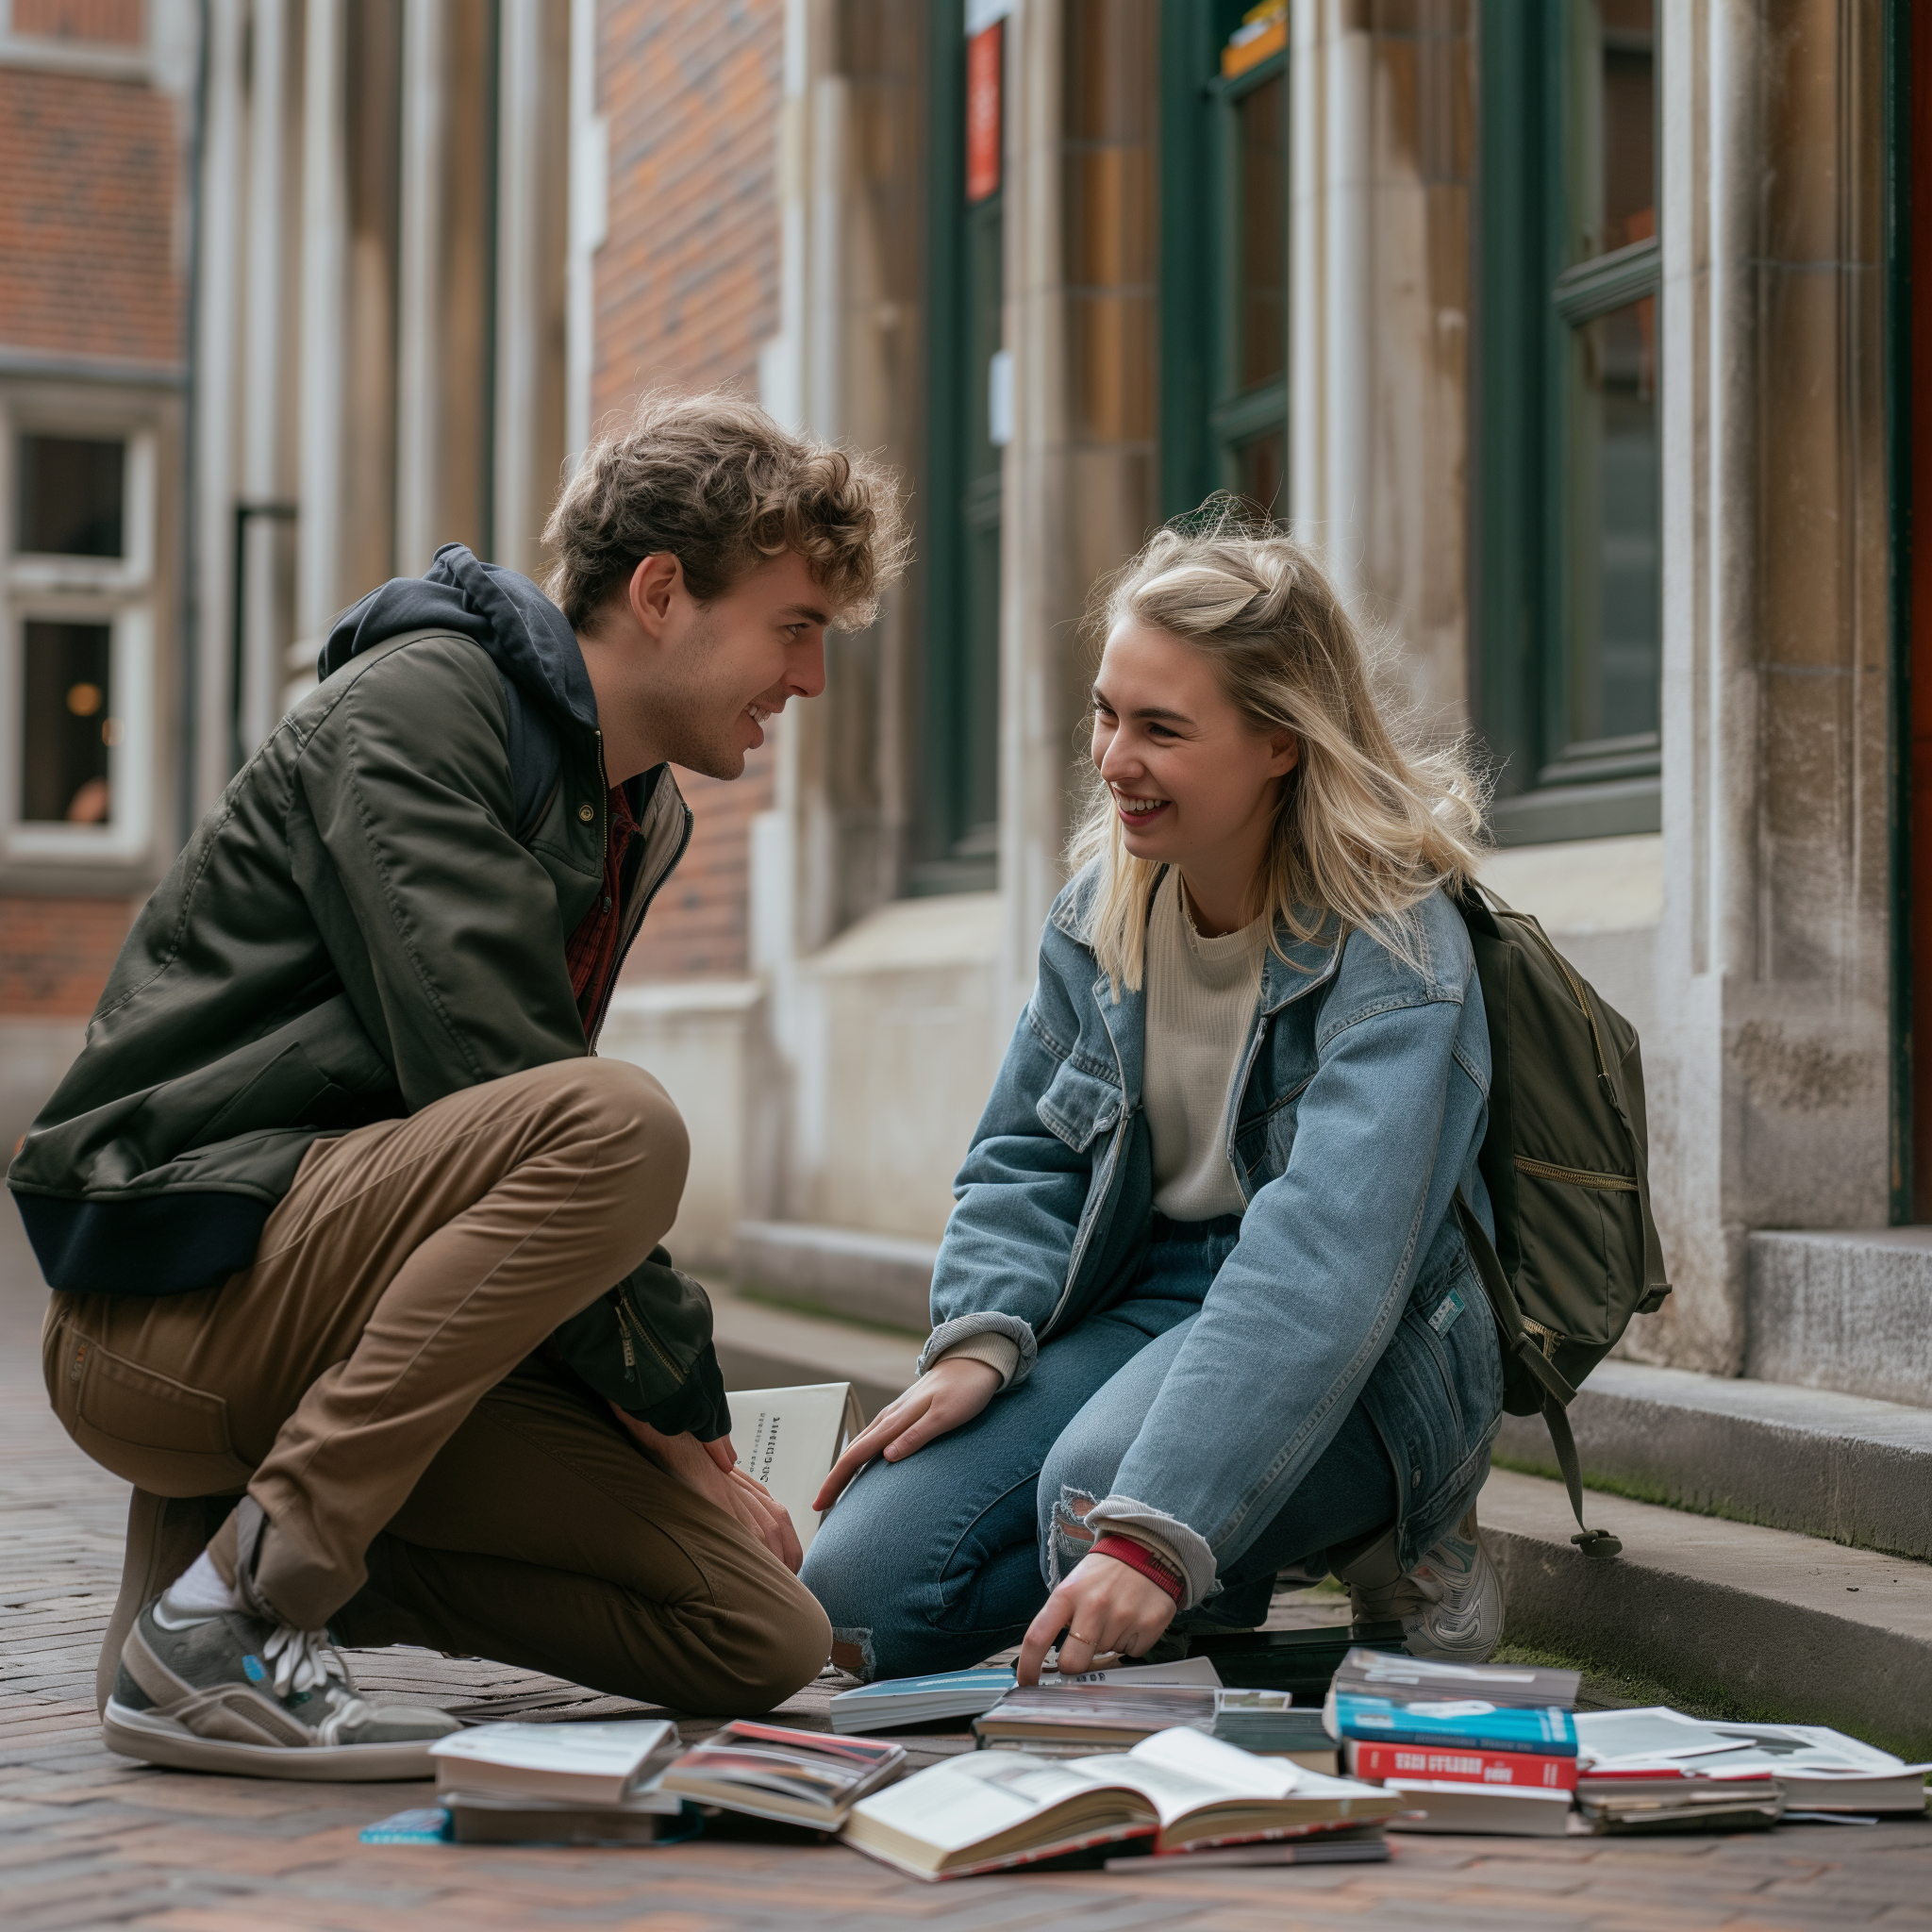 A woman bumps into a man on a college campus and books are scattered around them | Source: Midjourney